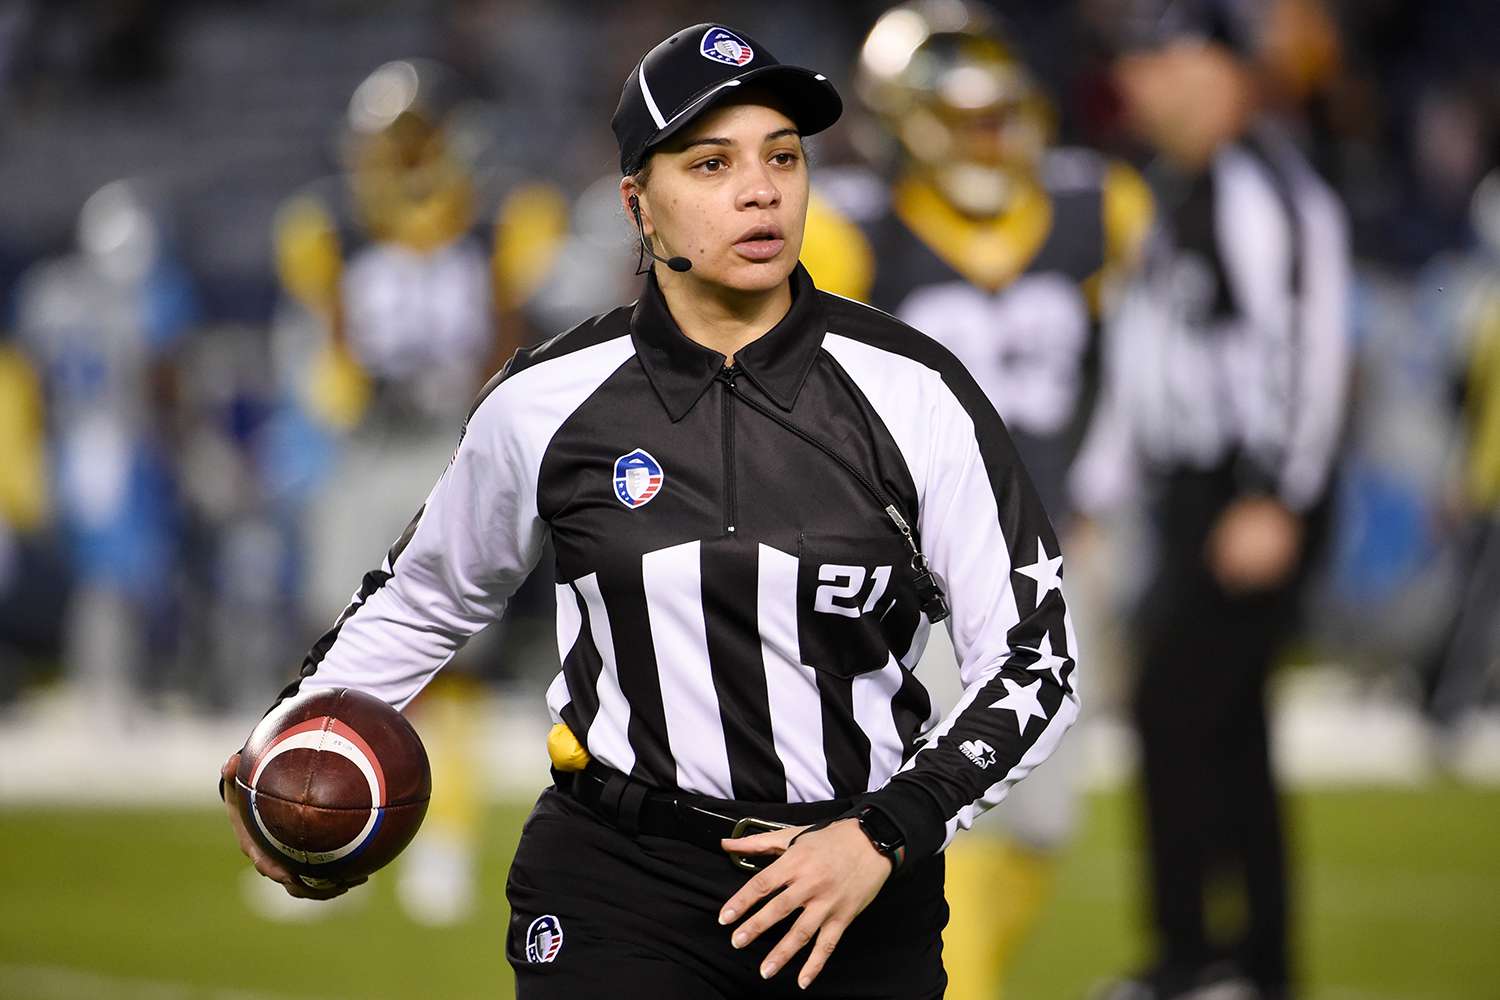 Referee Maia Chaka officiates while the Salt Lake Stallions and the San Diego Fleet play in the Alliance of American Football game at SDCCU Stadium on March 09, 2019 in San Diego, California